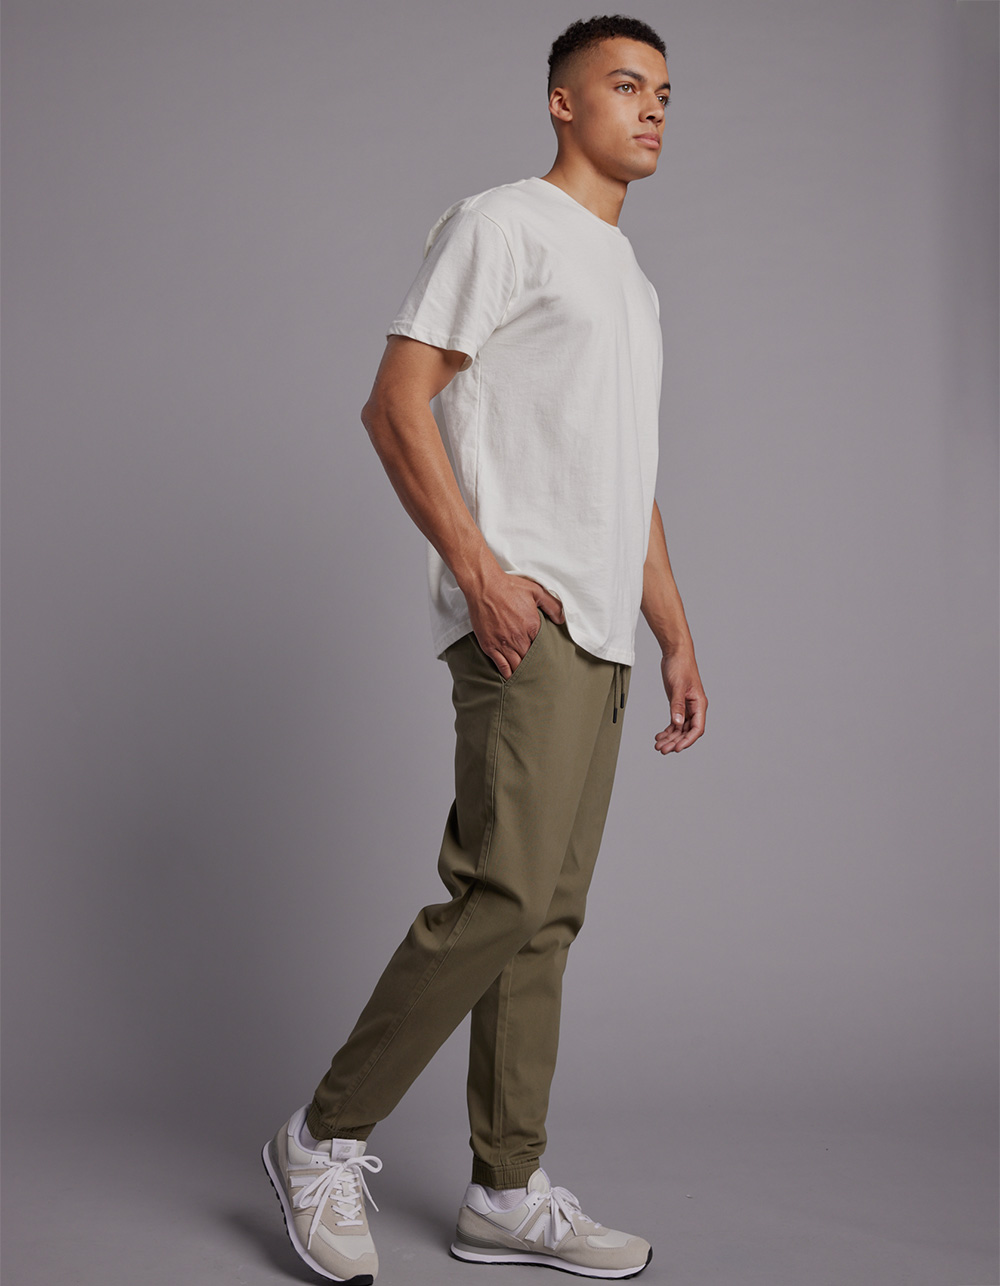 Sovereign State Pull On Stretch Twill Jogger Pant (Big Boys